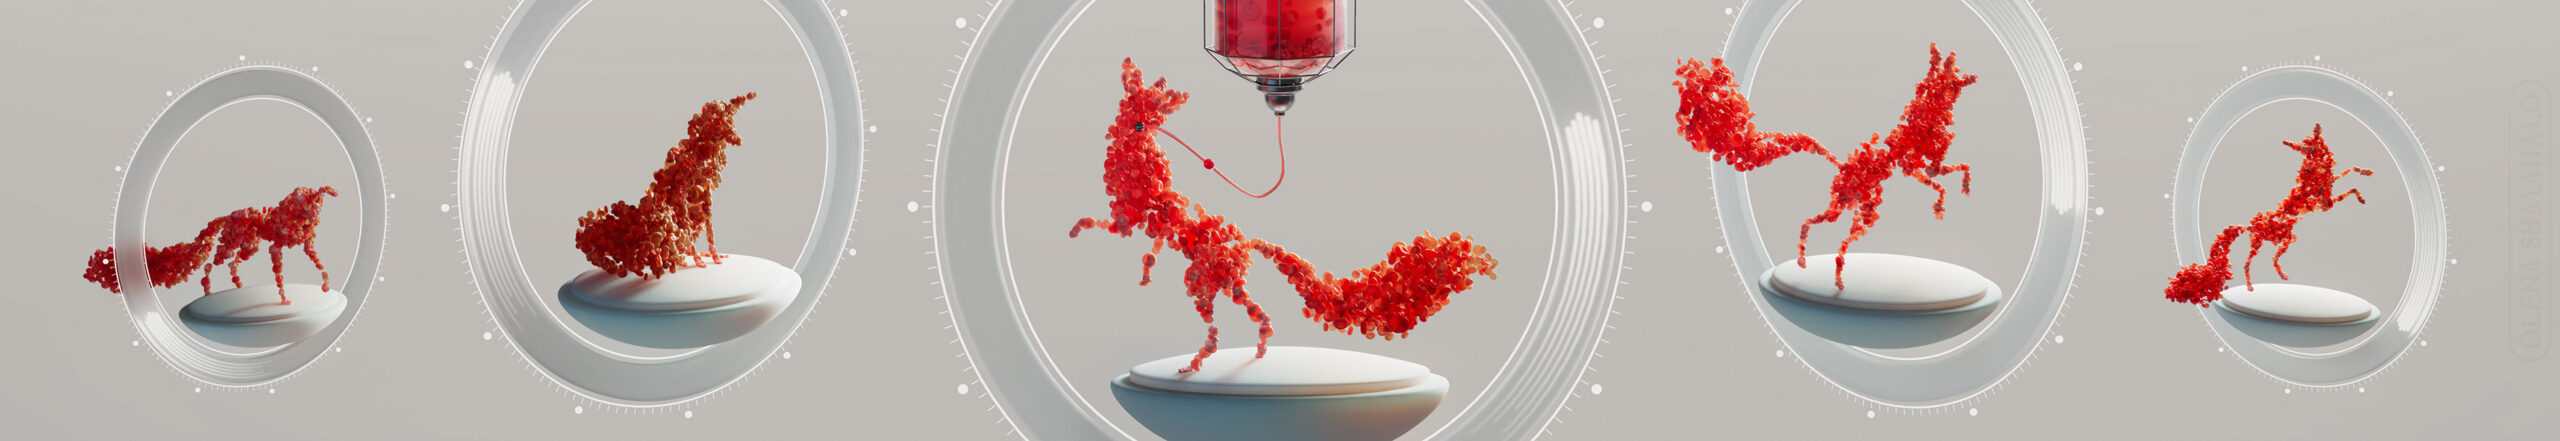 3D art: fox silhouette made up of blood cells, getting a blood injection